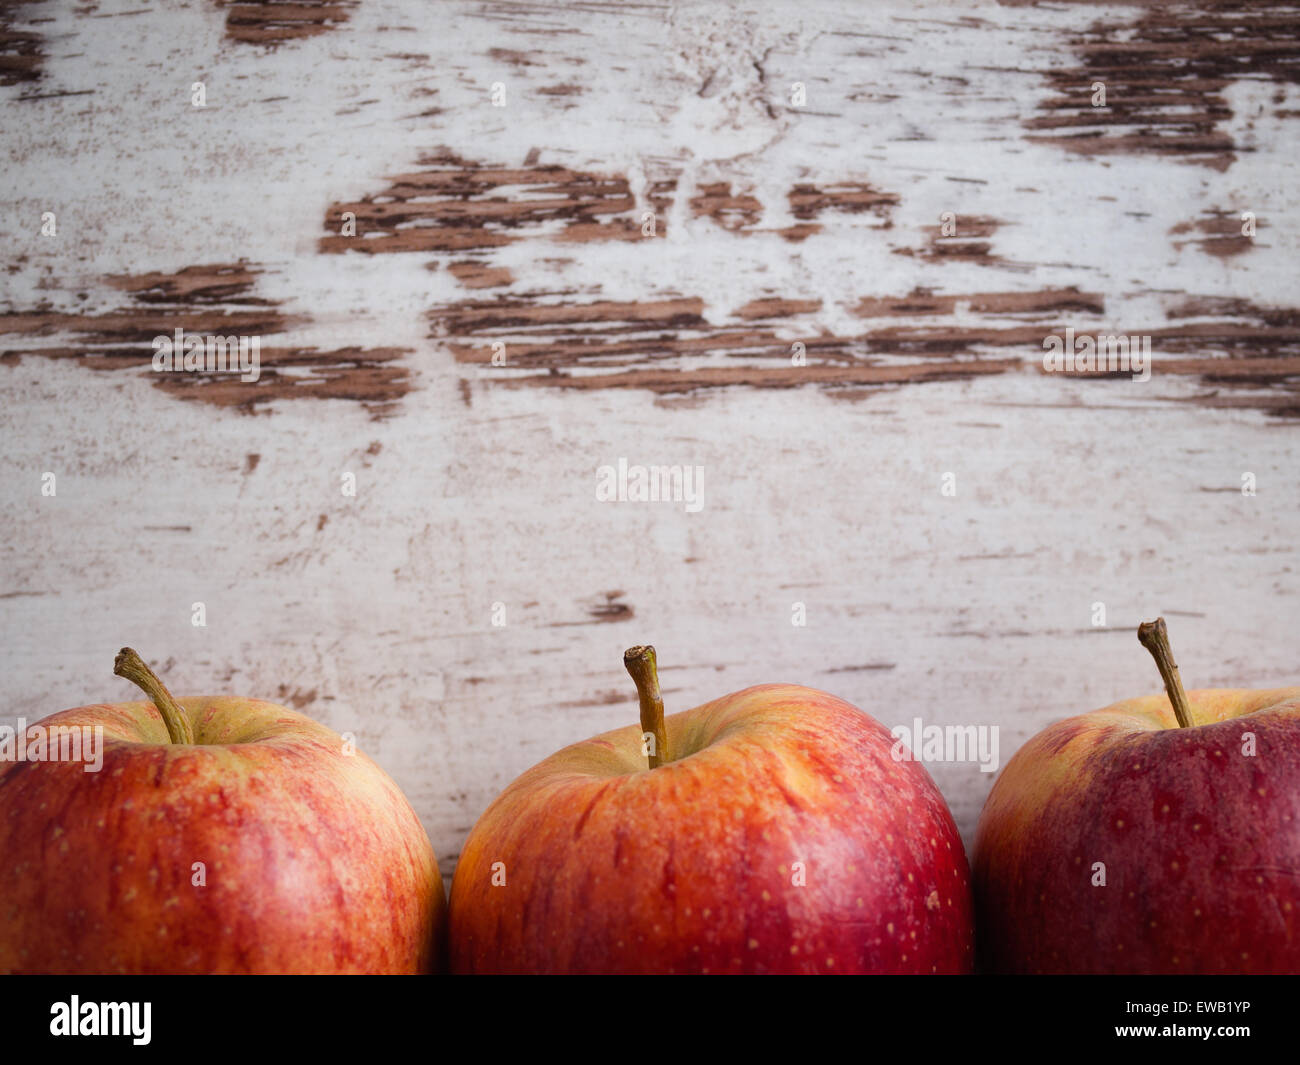 Three red apples over wooden background in a healthy background Stock Photo